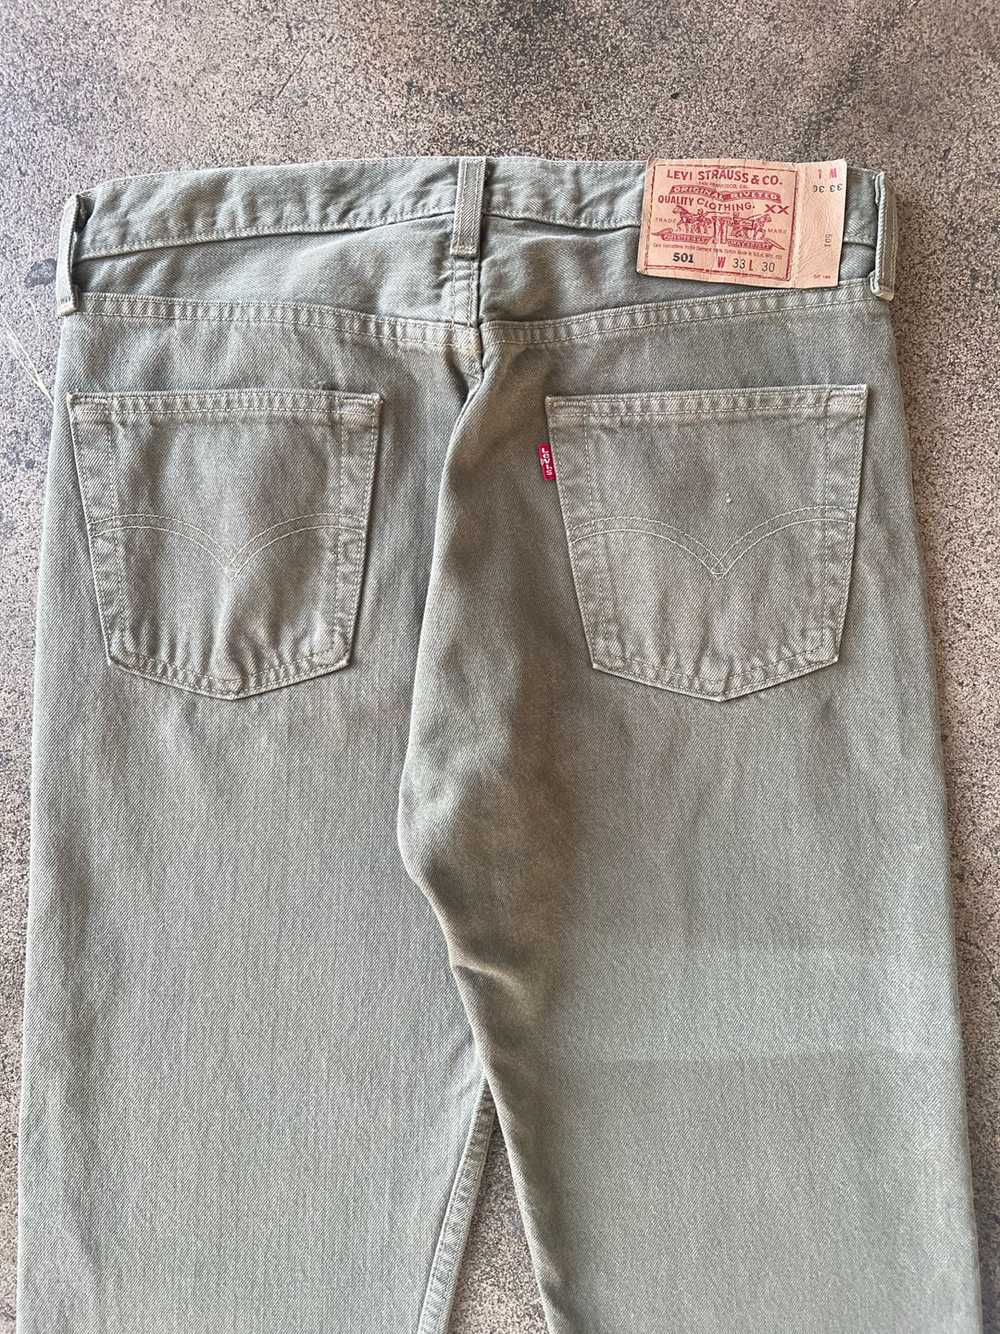 1990s Levi's 501 Faded Green Jeans 33" x 30" - image 5